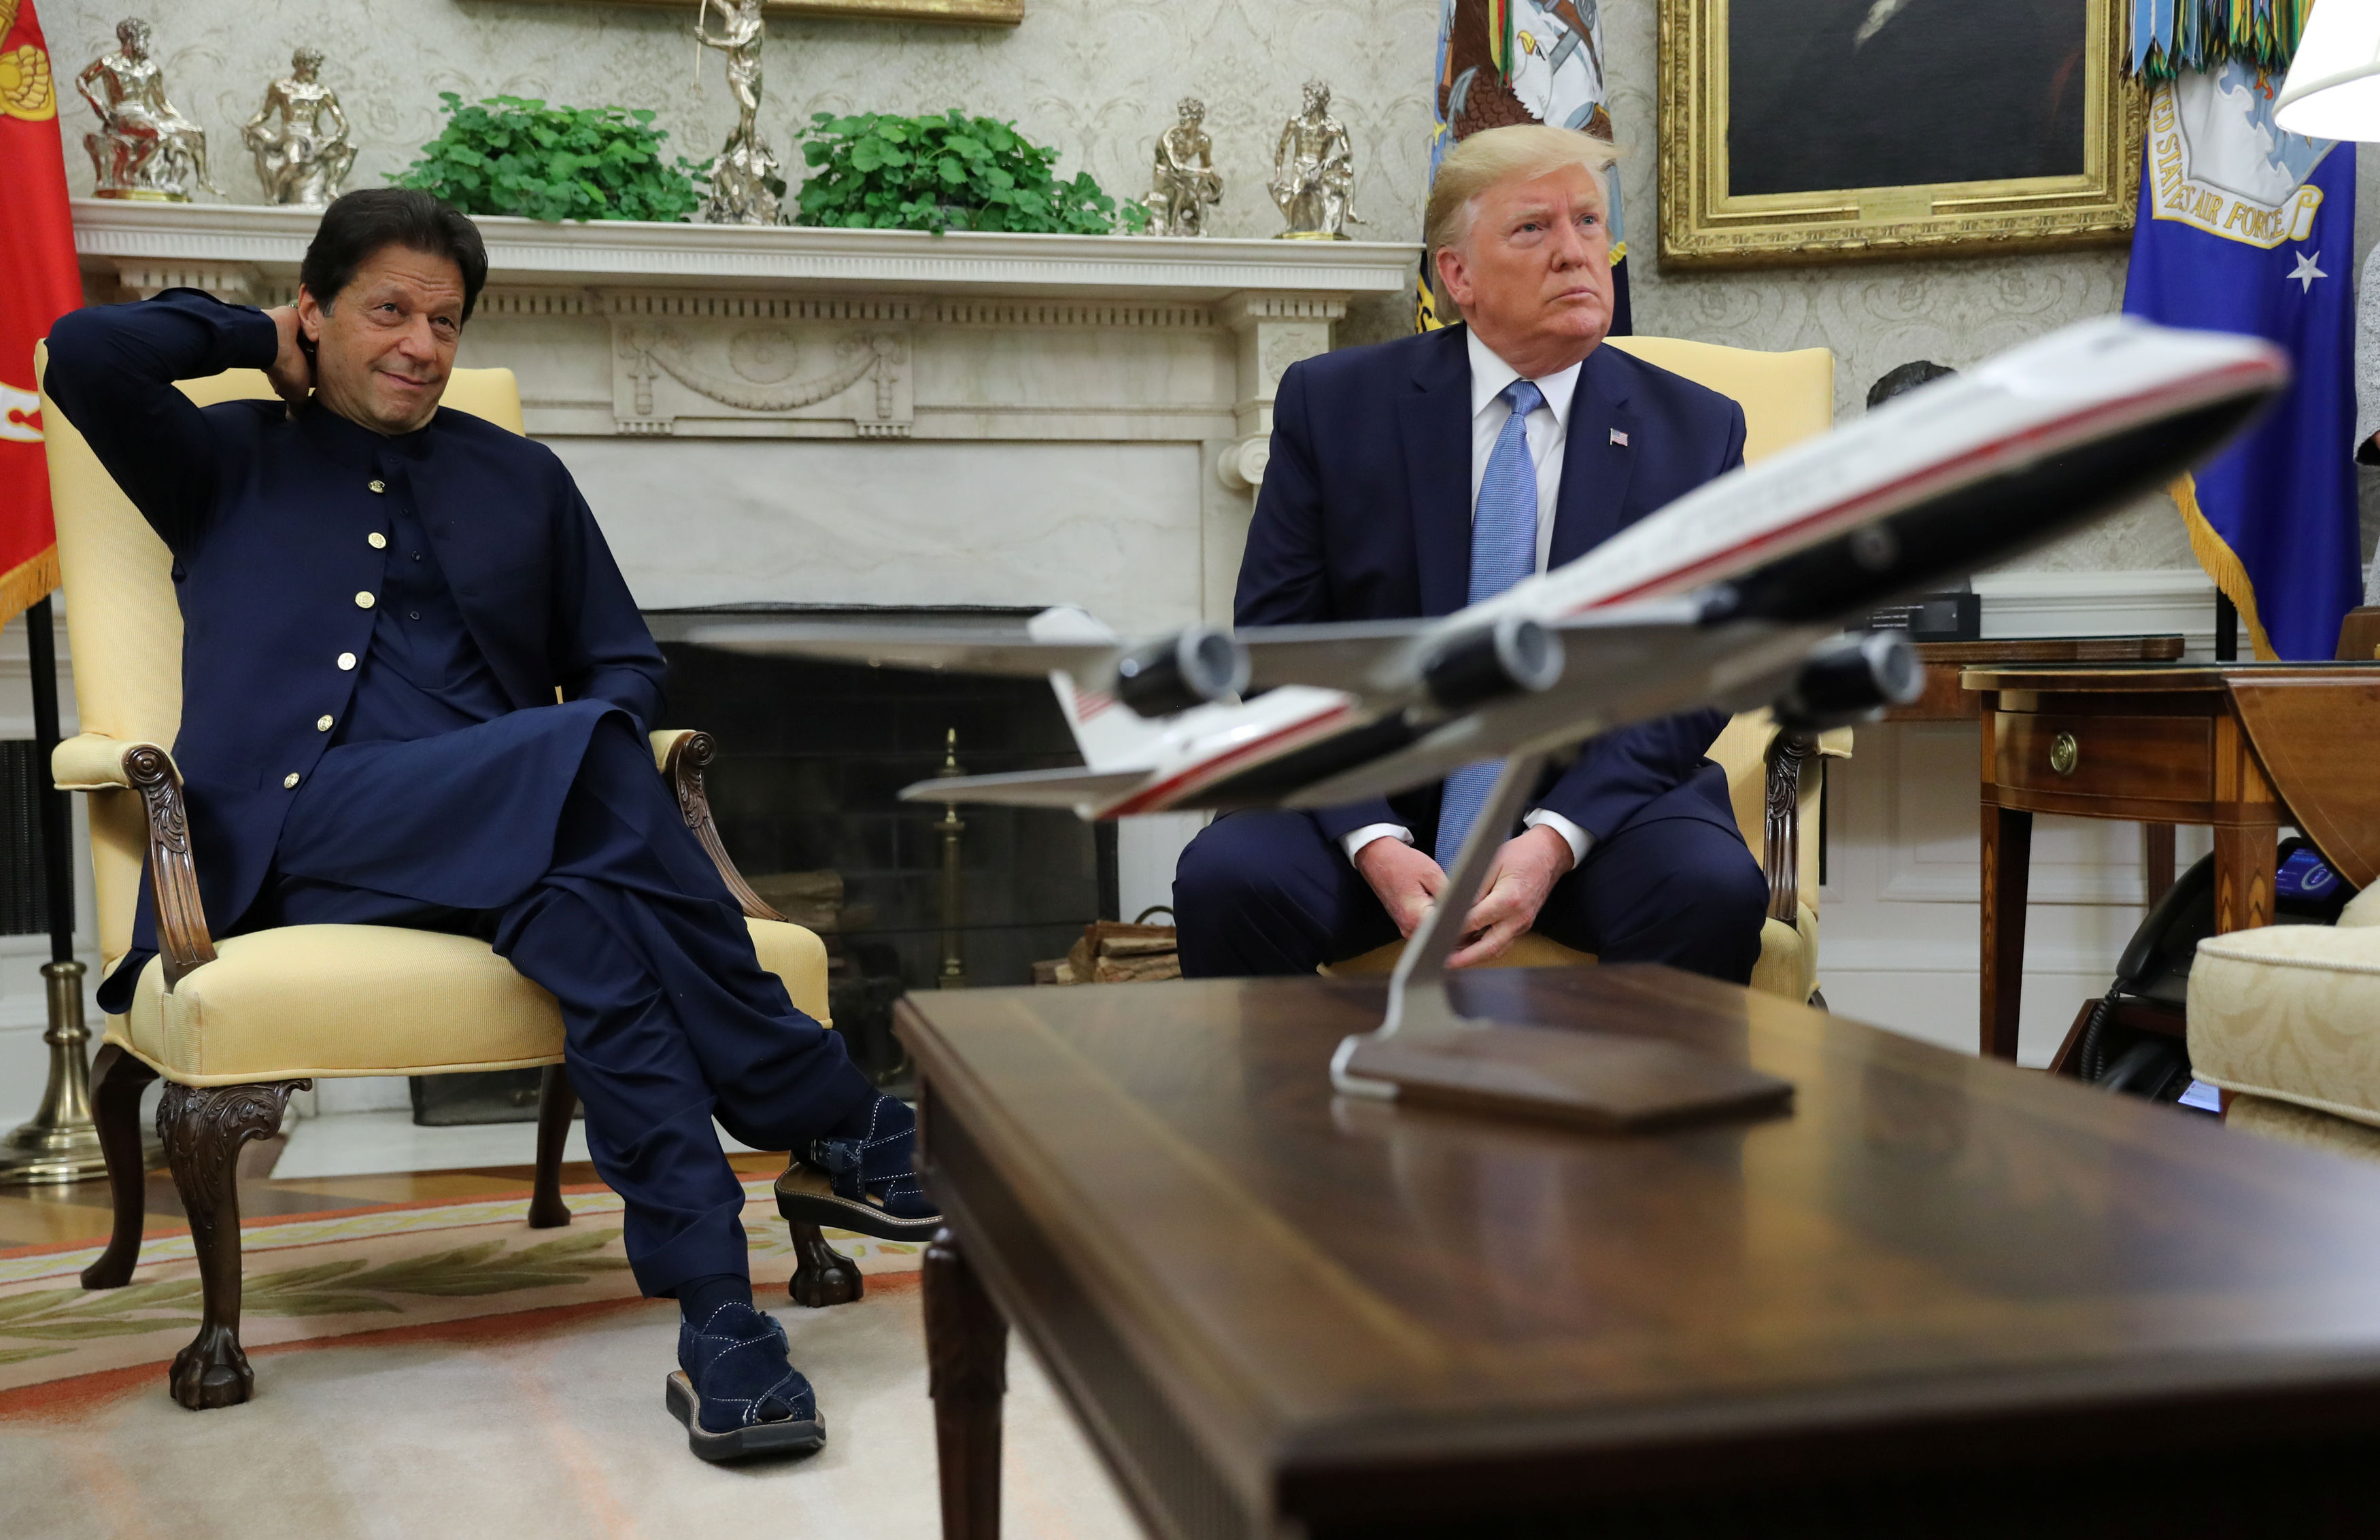 U.S. President Donald Trump and Pakistan's Prime Minister Imran Khan take questions from reporters in the Oval Office at the White House in Washington, U.S., July 22, 2019. /Reuters Photo